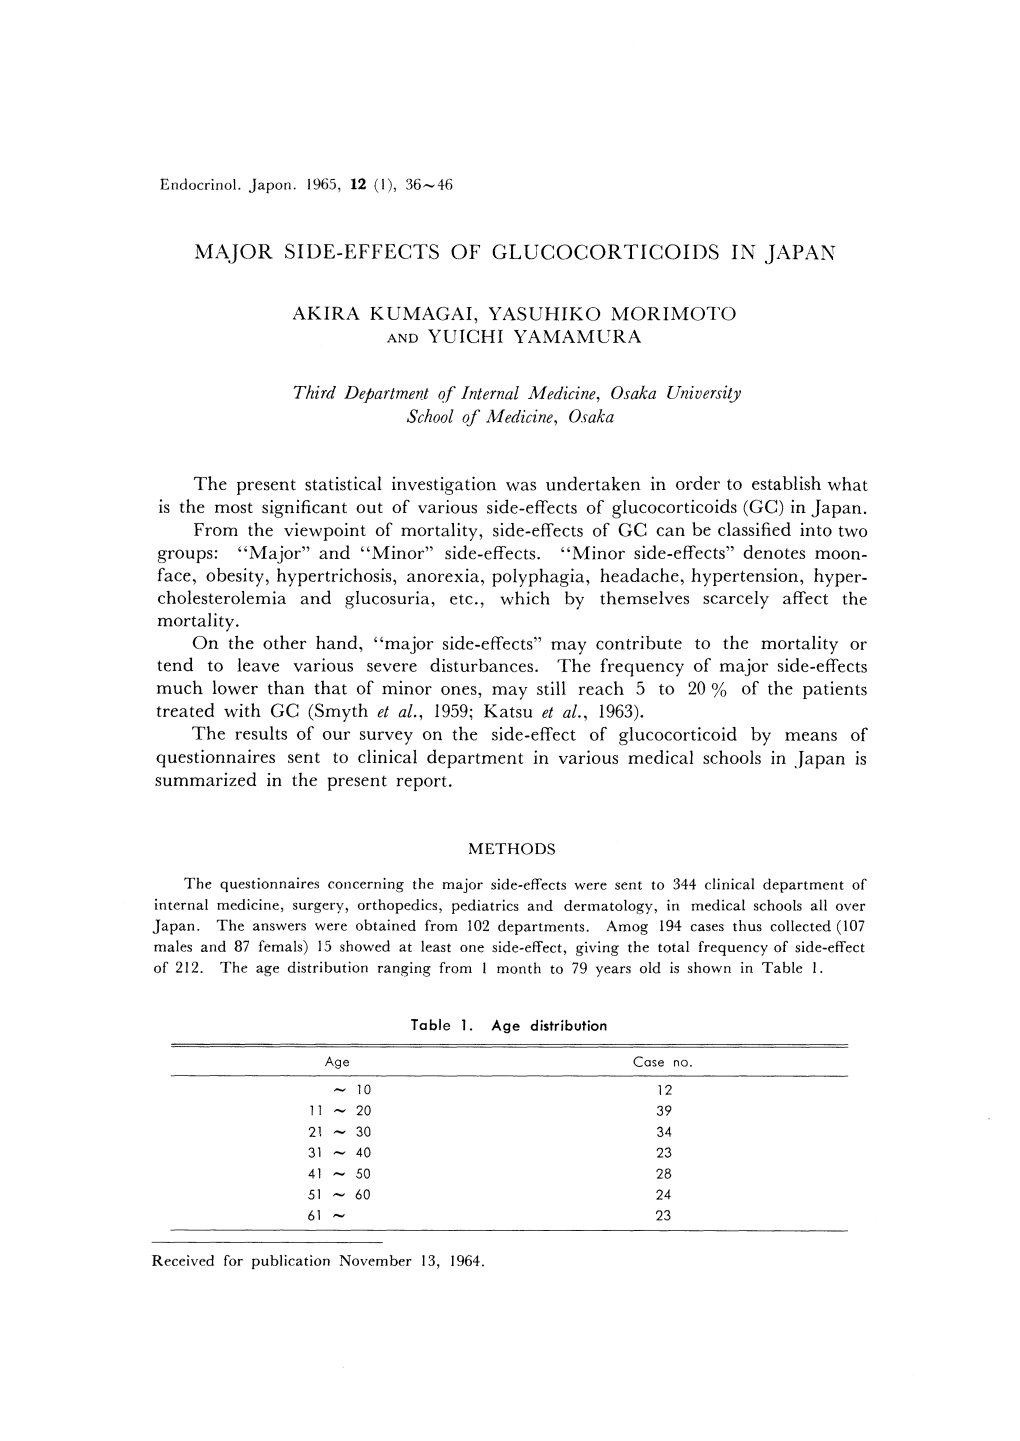 MAJOR SIDE-EFFECTS of GLUCOCORTICOIDS in JAPAN the Present Statistical Investigation Was Undertaken in Order to Establish What I